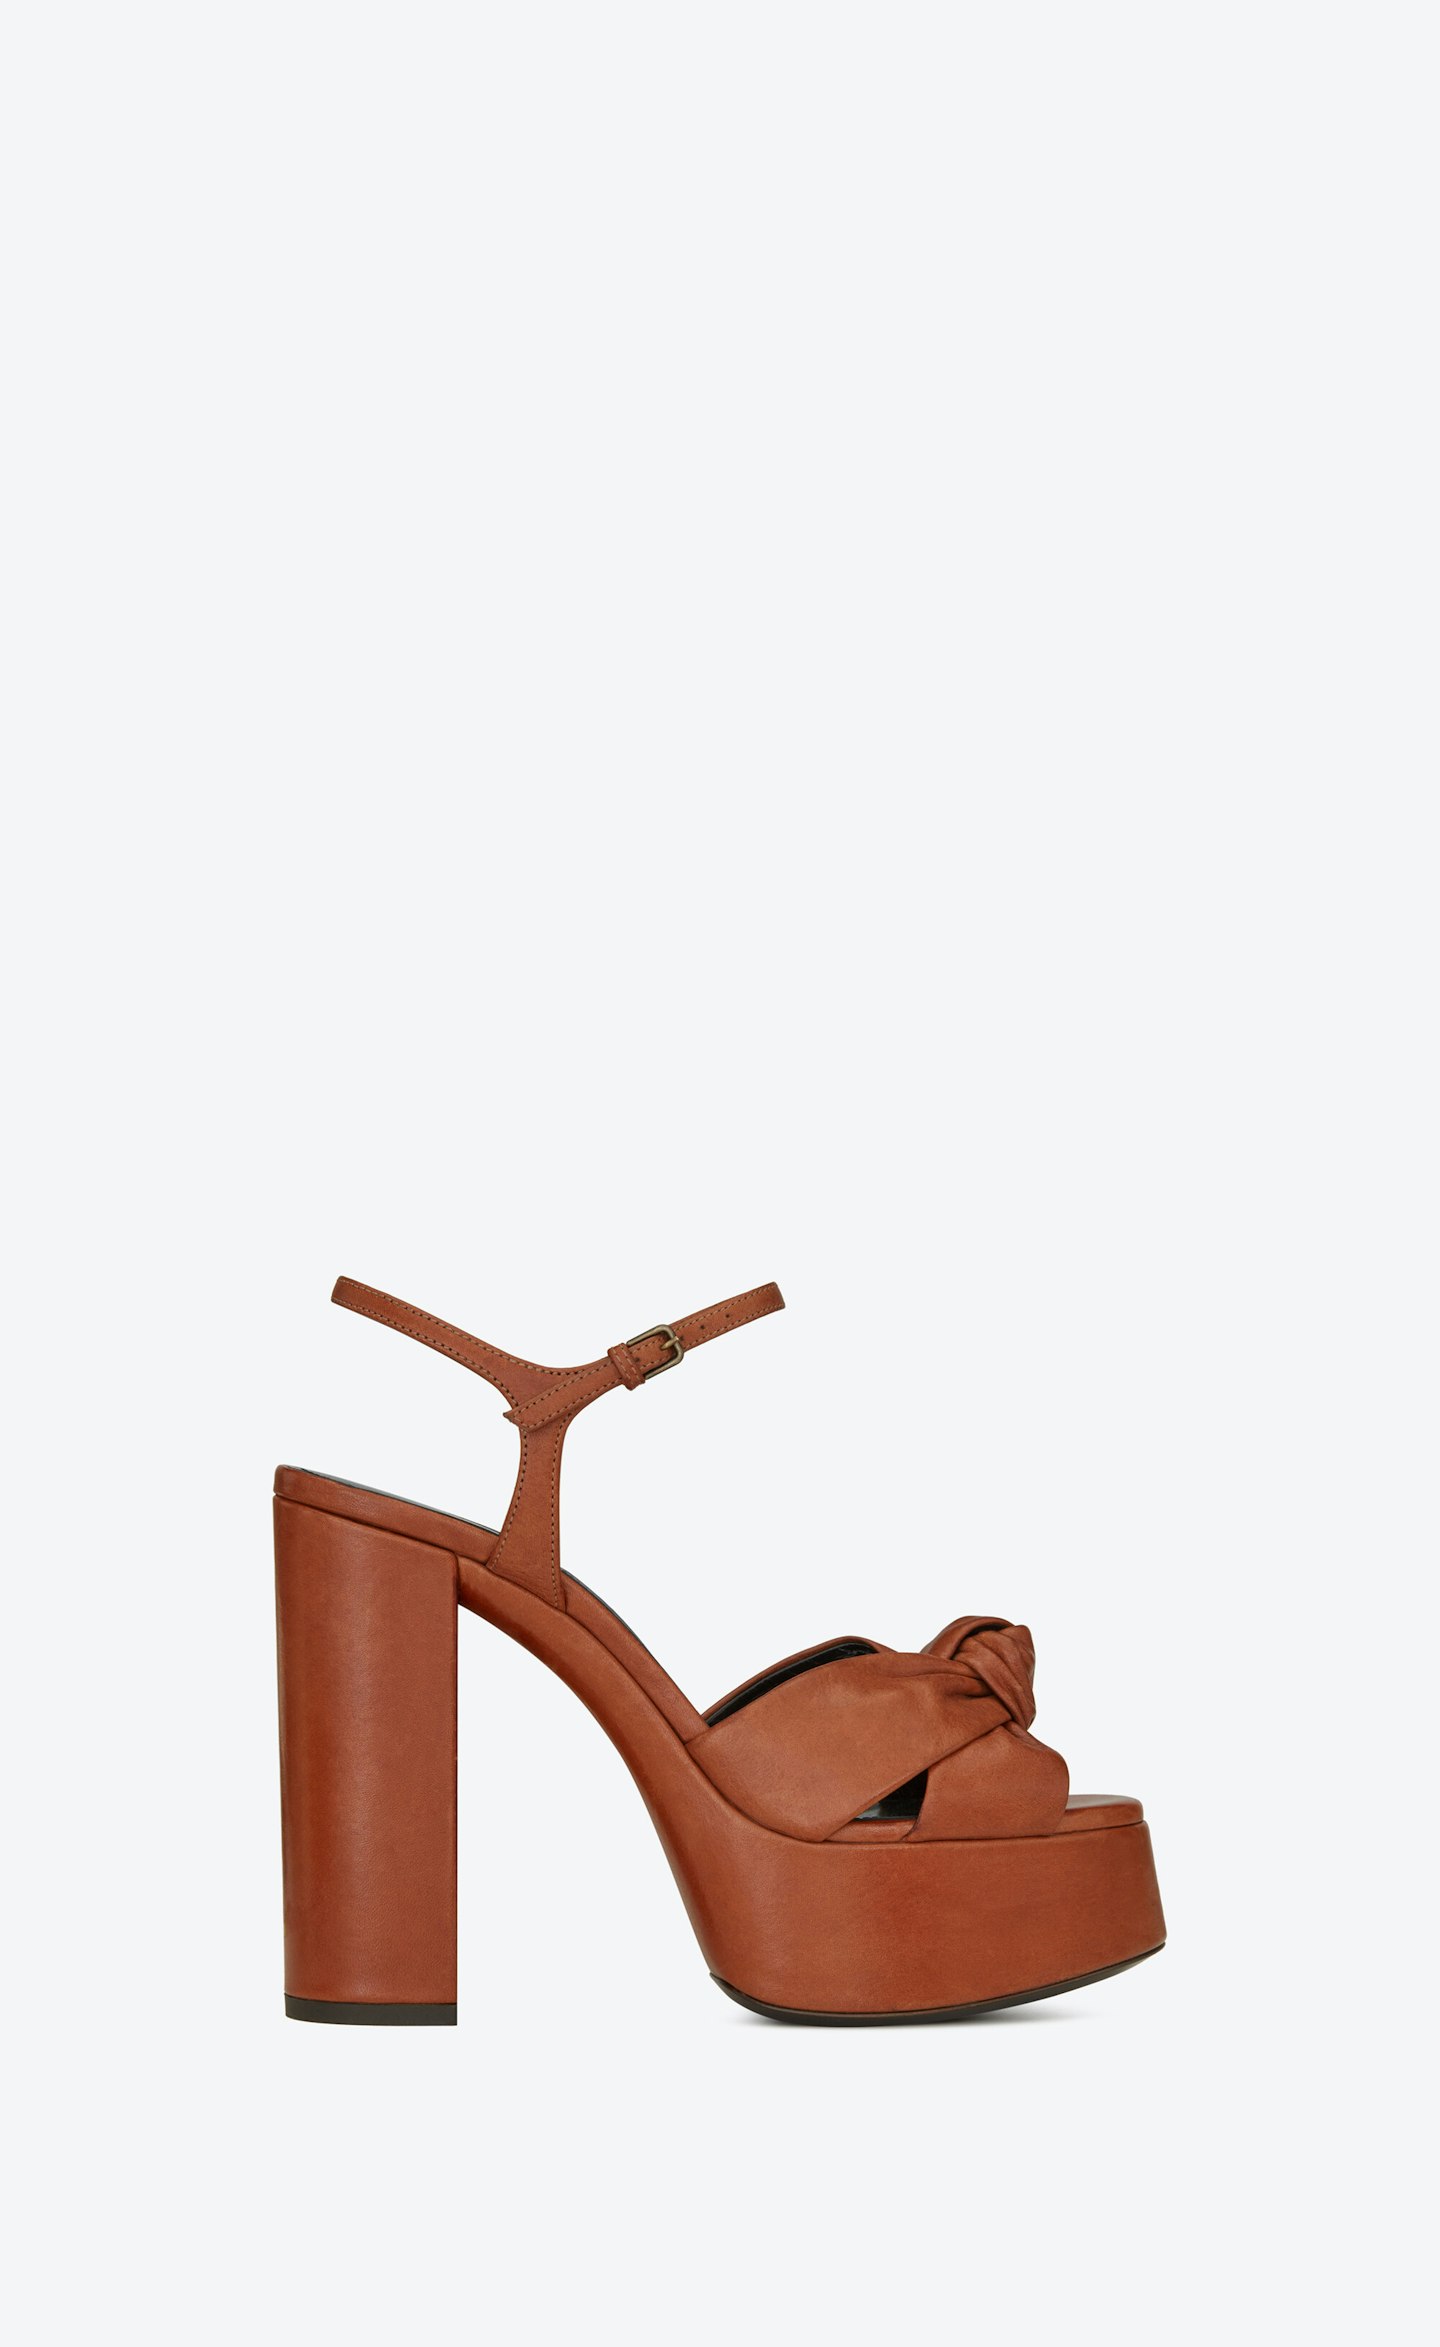 Saint Laurent, Bianca Sandals In Smooth Leather, £660